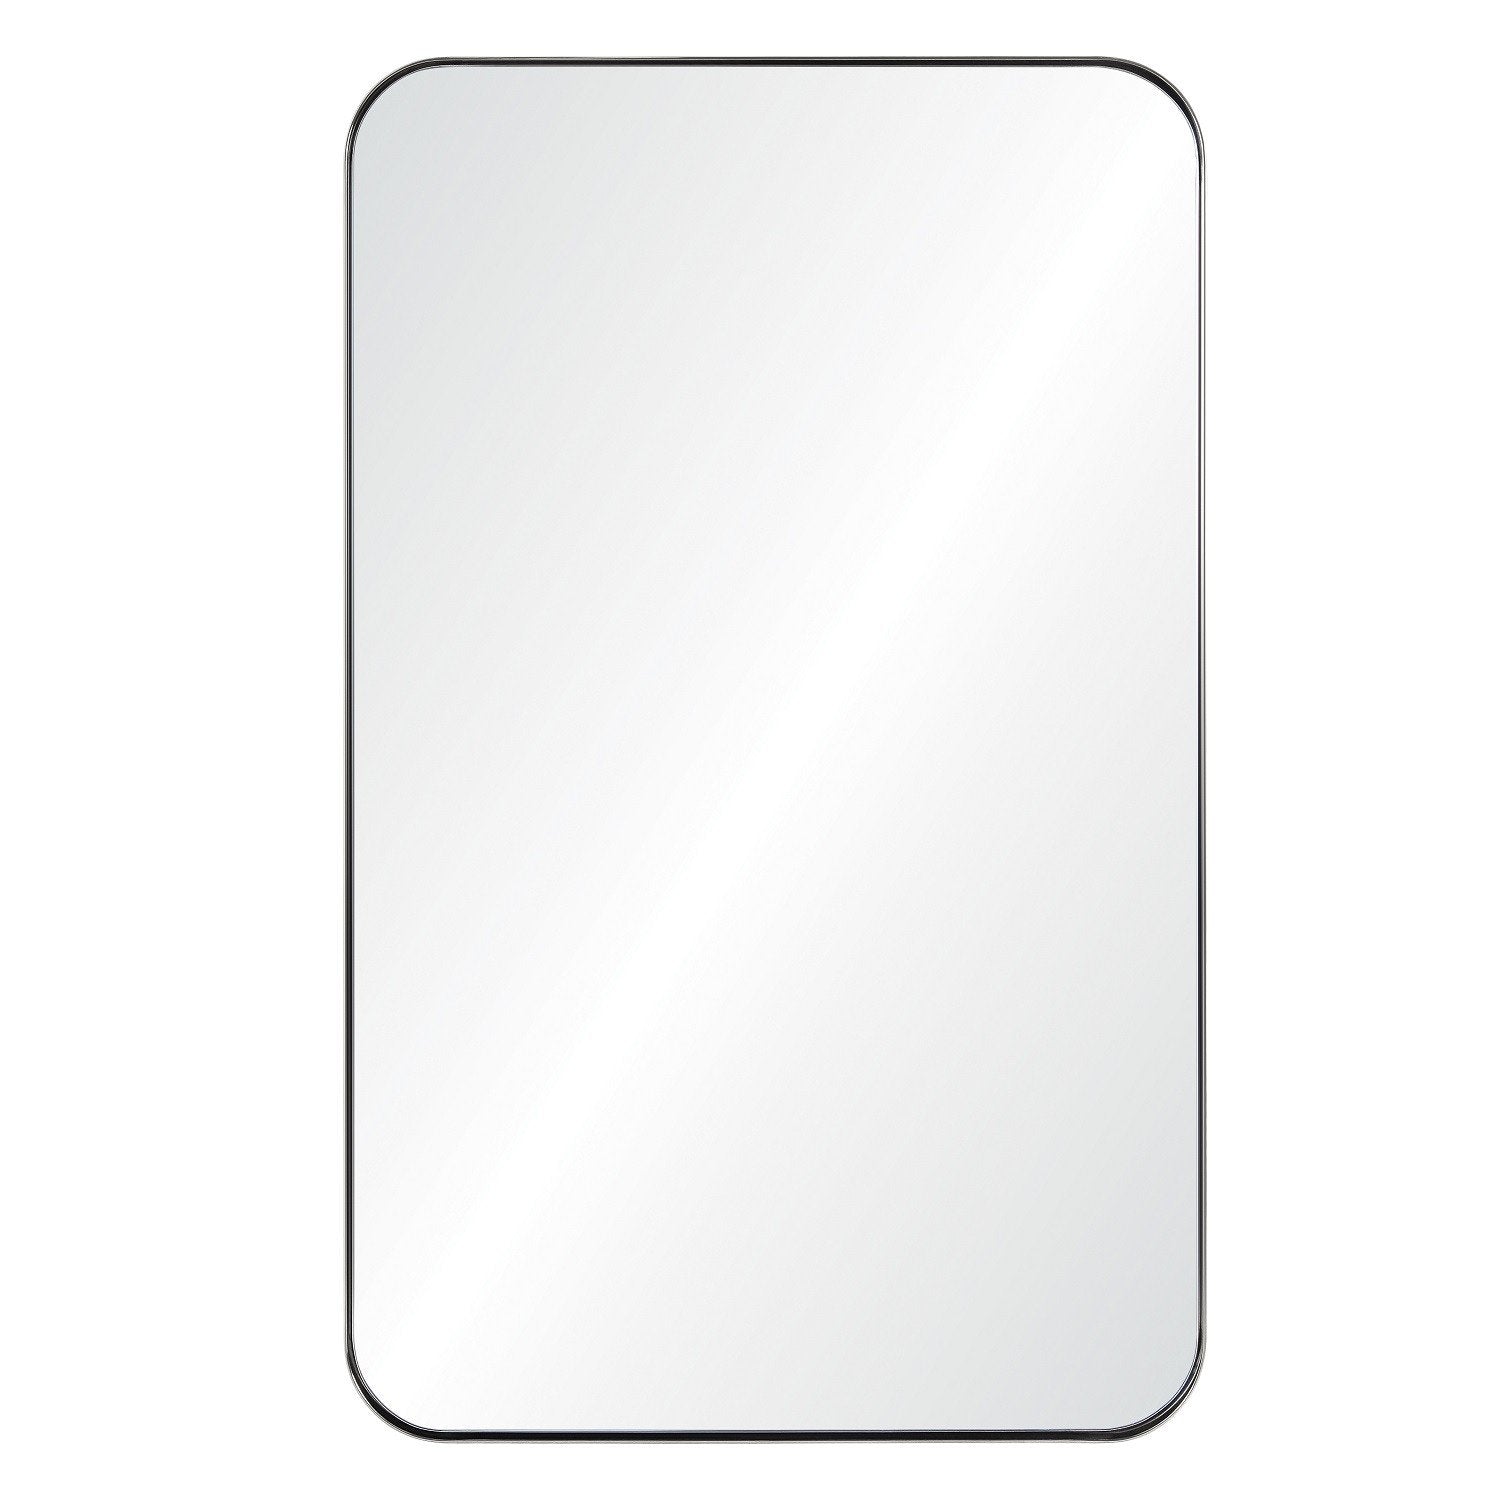 Fig Linens - Mirror Image Home - Stainless Steel Rectangular Wall Mirror